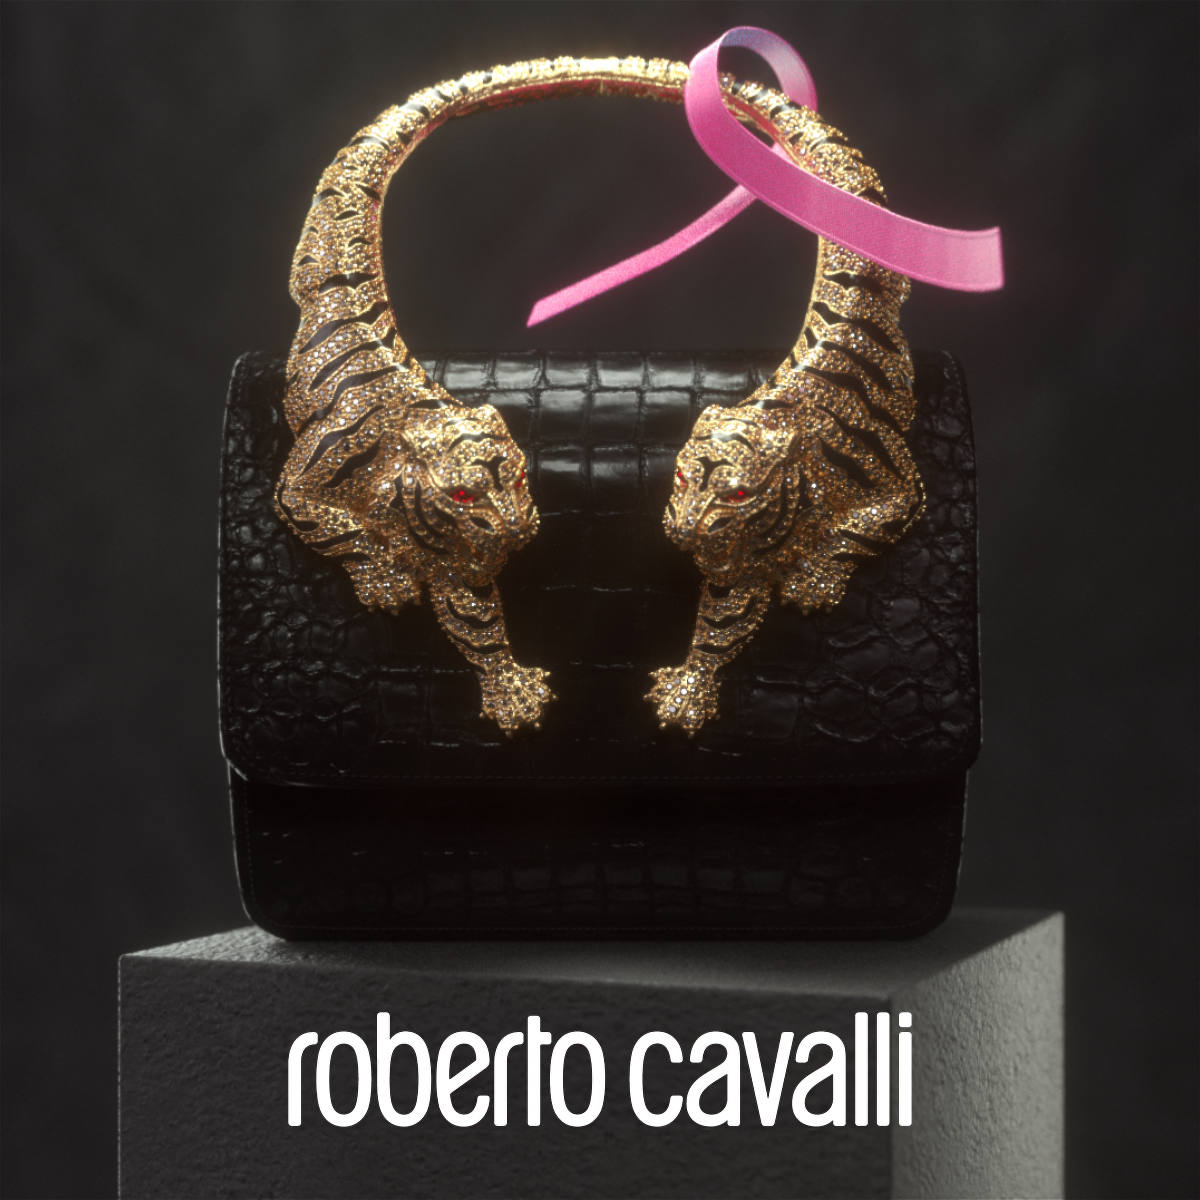 Roberto Cavalli Supports The Breastcancer.org During Breast Cancer Prevention Month